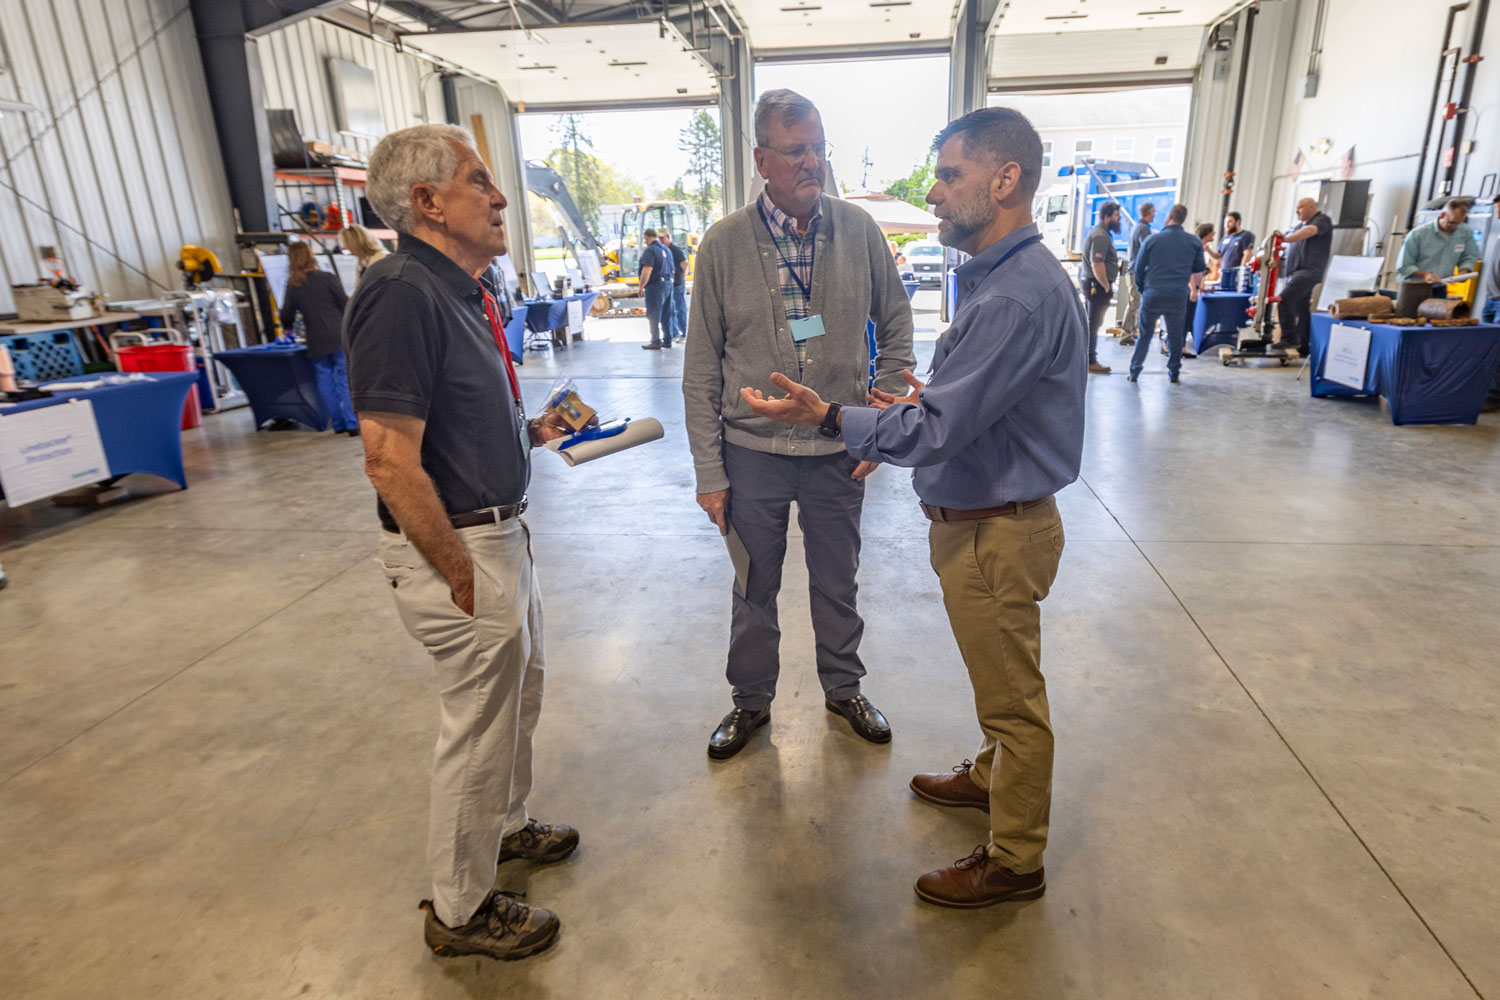 Photos of the Connecticut Water open house in Clinton